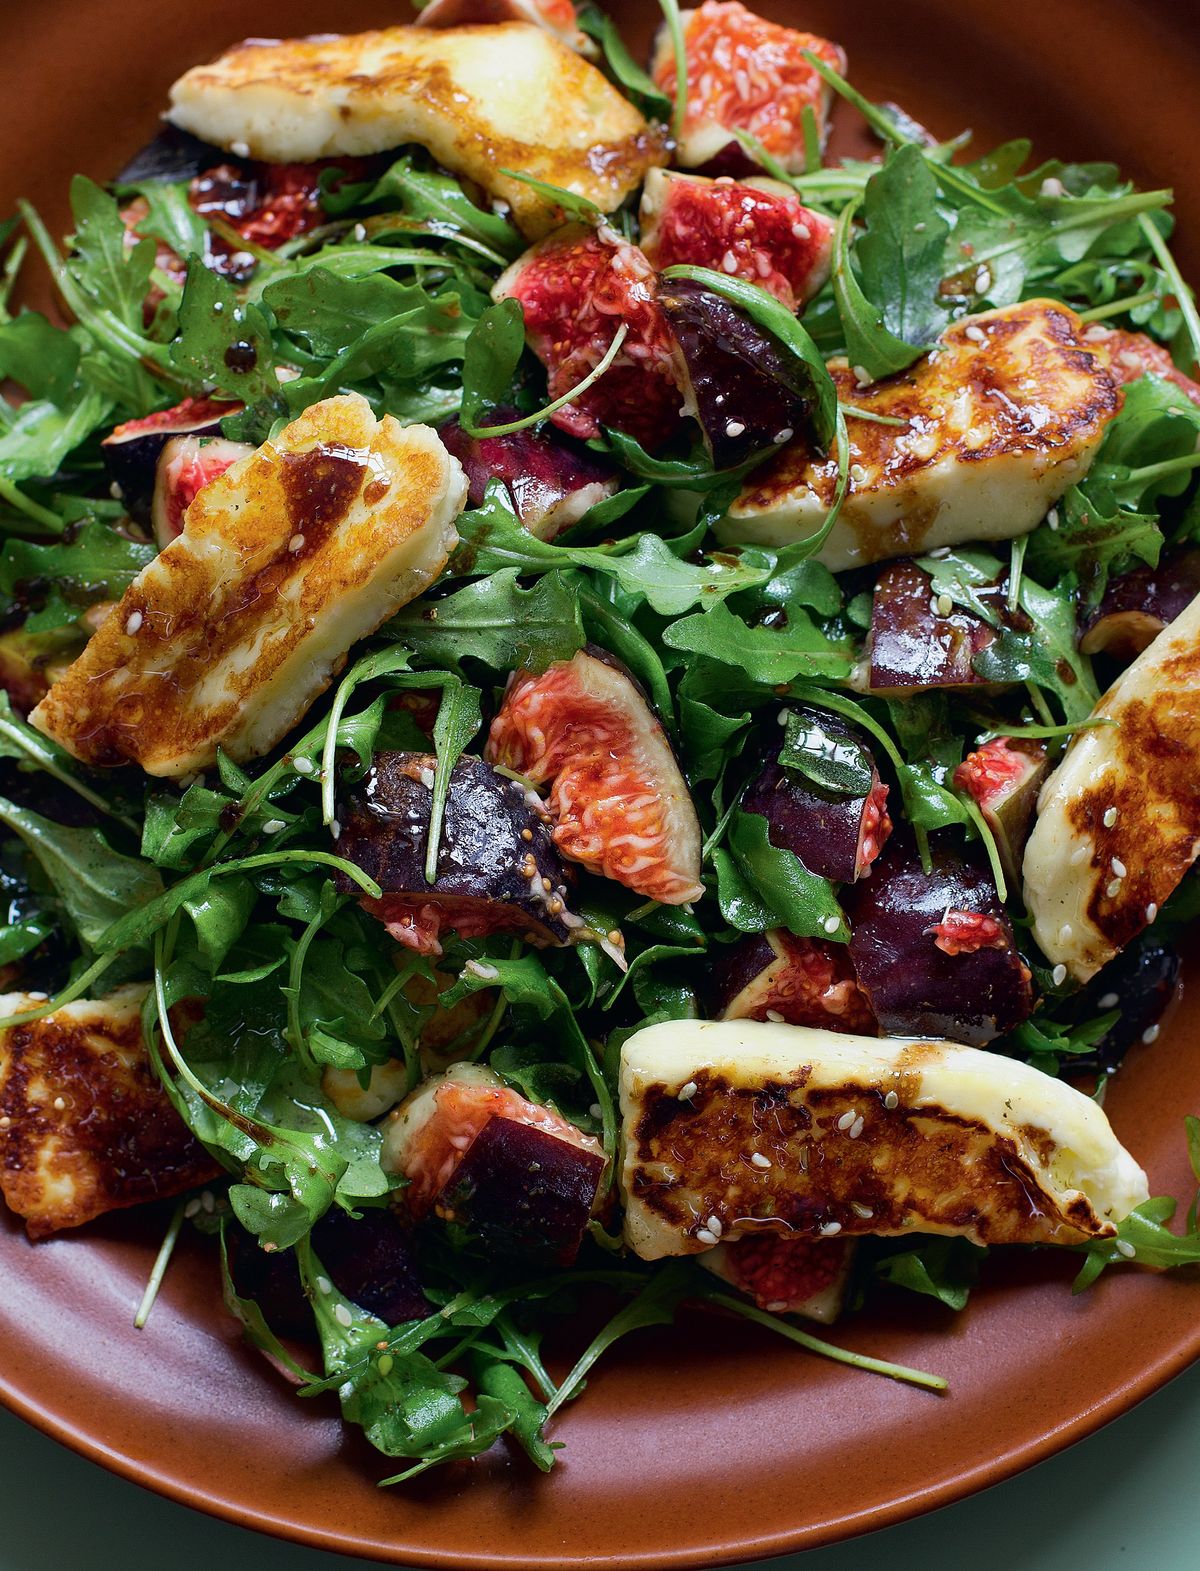 Fresh Figs or Pears with Halloumi and Rocket